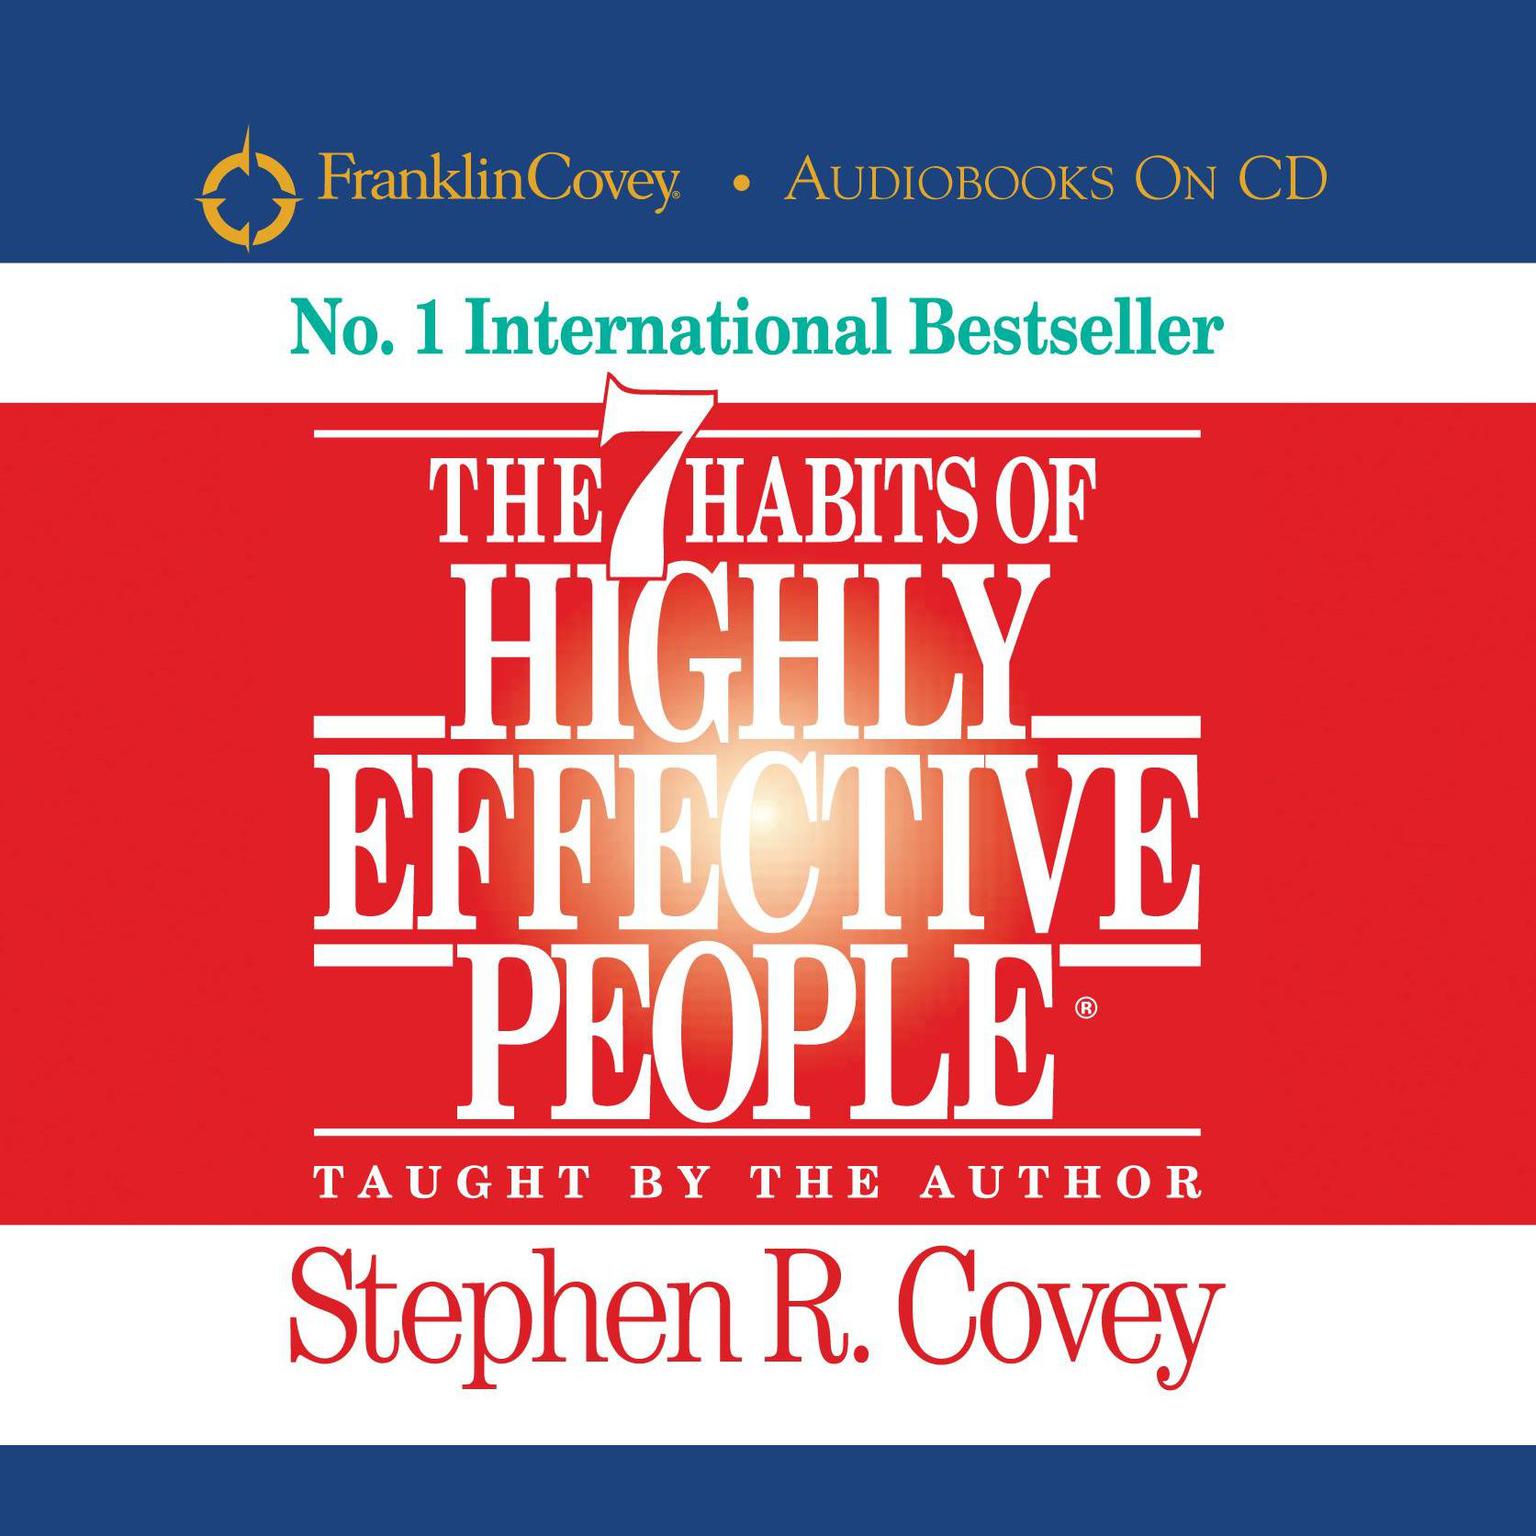 The 7 Habits Of Highly Effective People (Abridged) Audiobook, by Stephen R. Covey